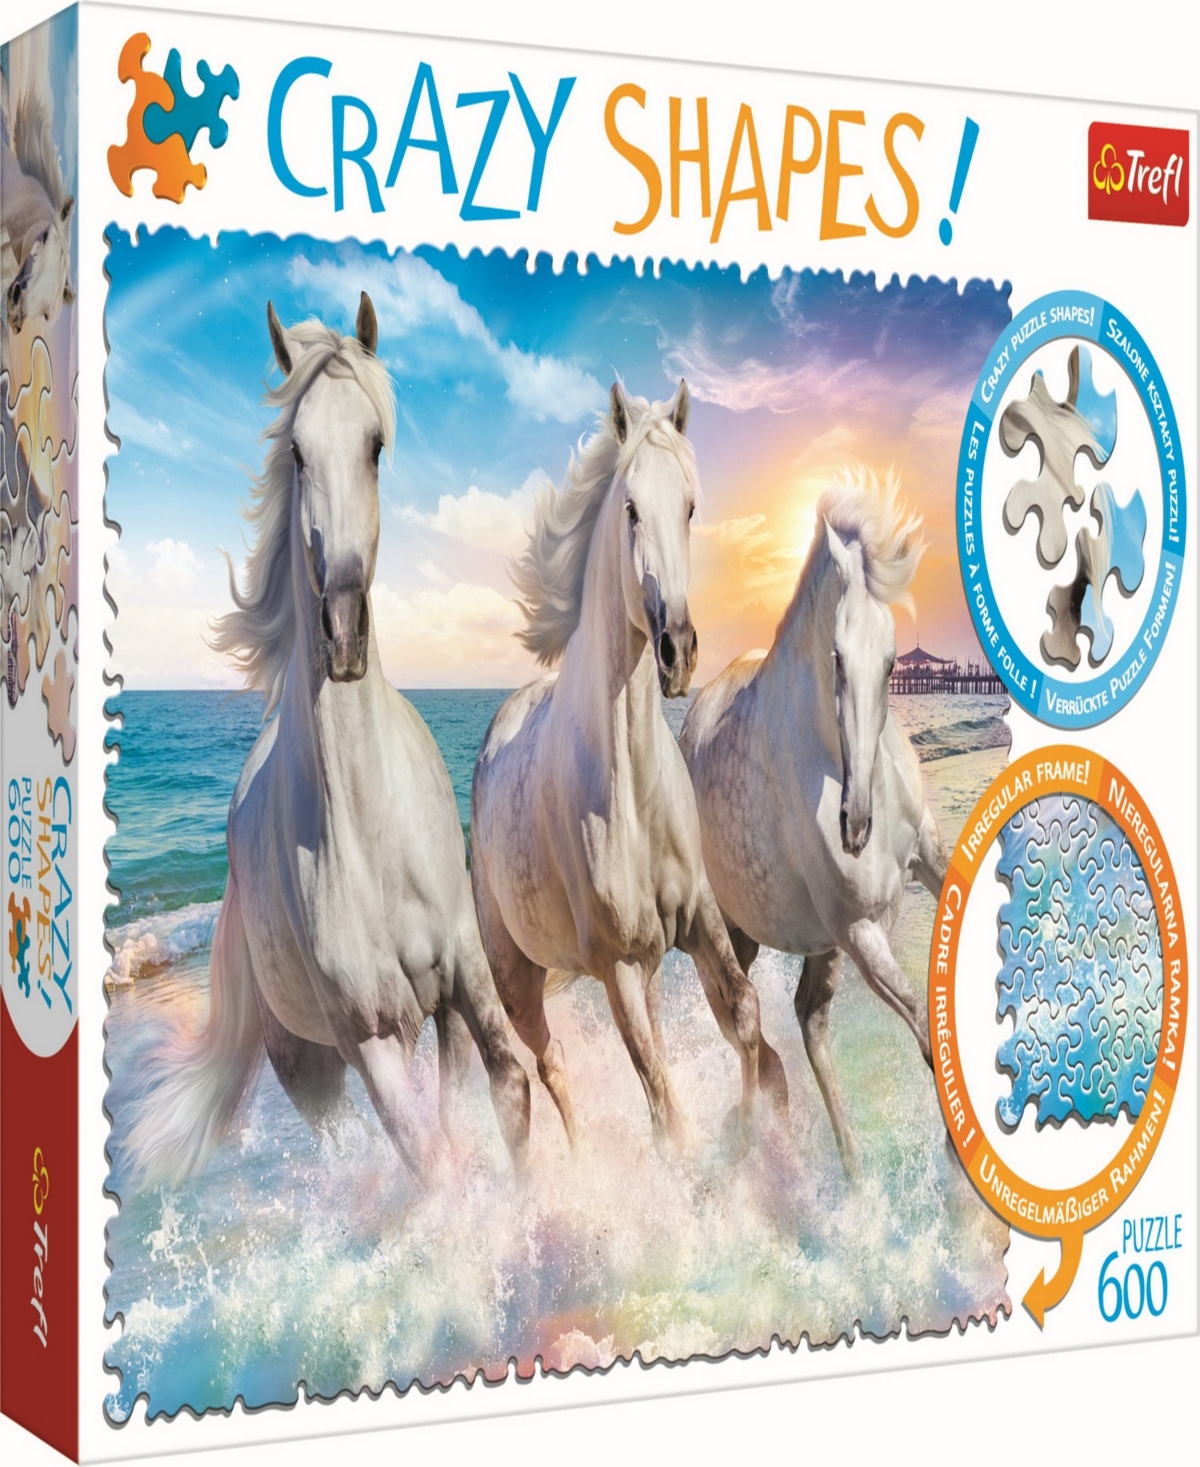 Trefl Crazy Shape Jigsaw Puzzle Horses Gallop Among The Waves, 600 Pieces In Multicolor